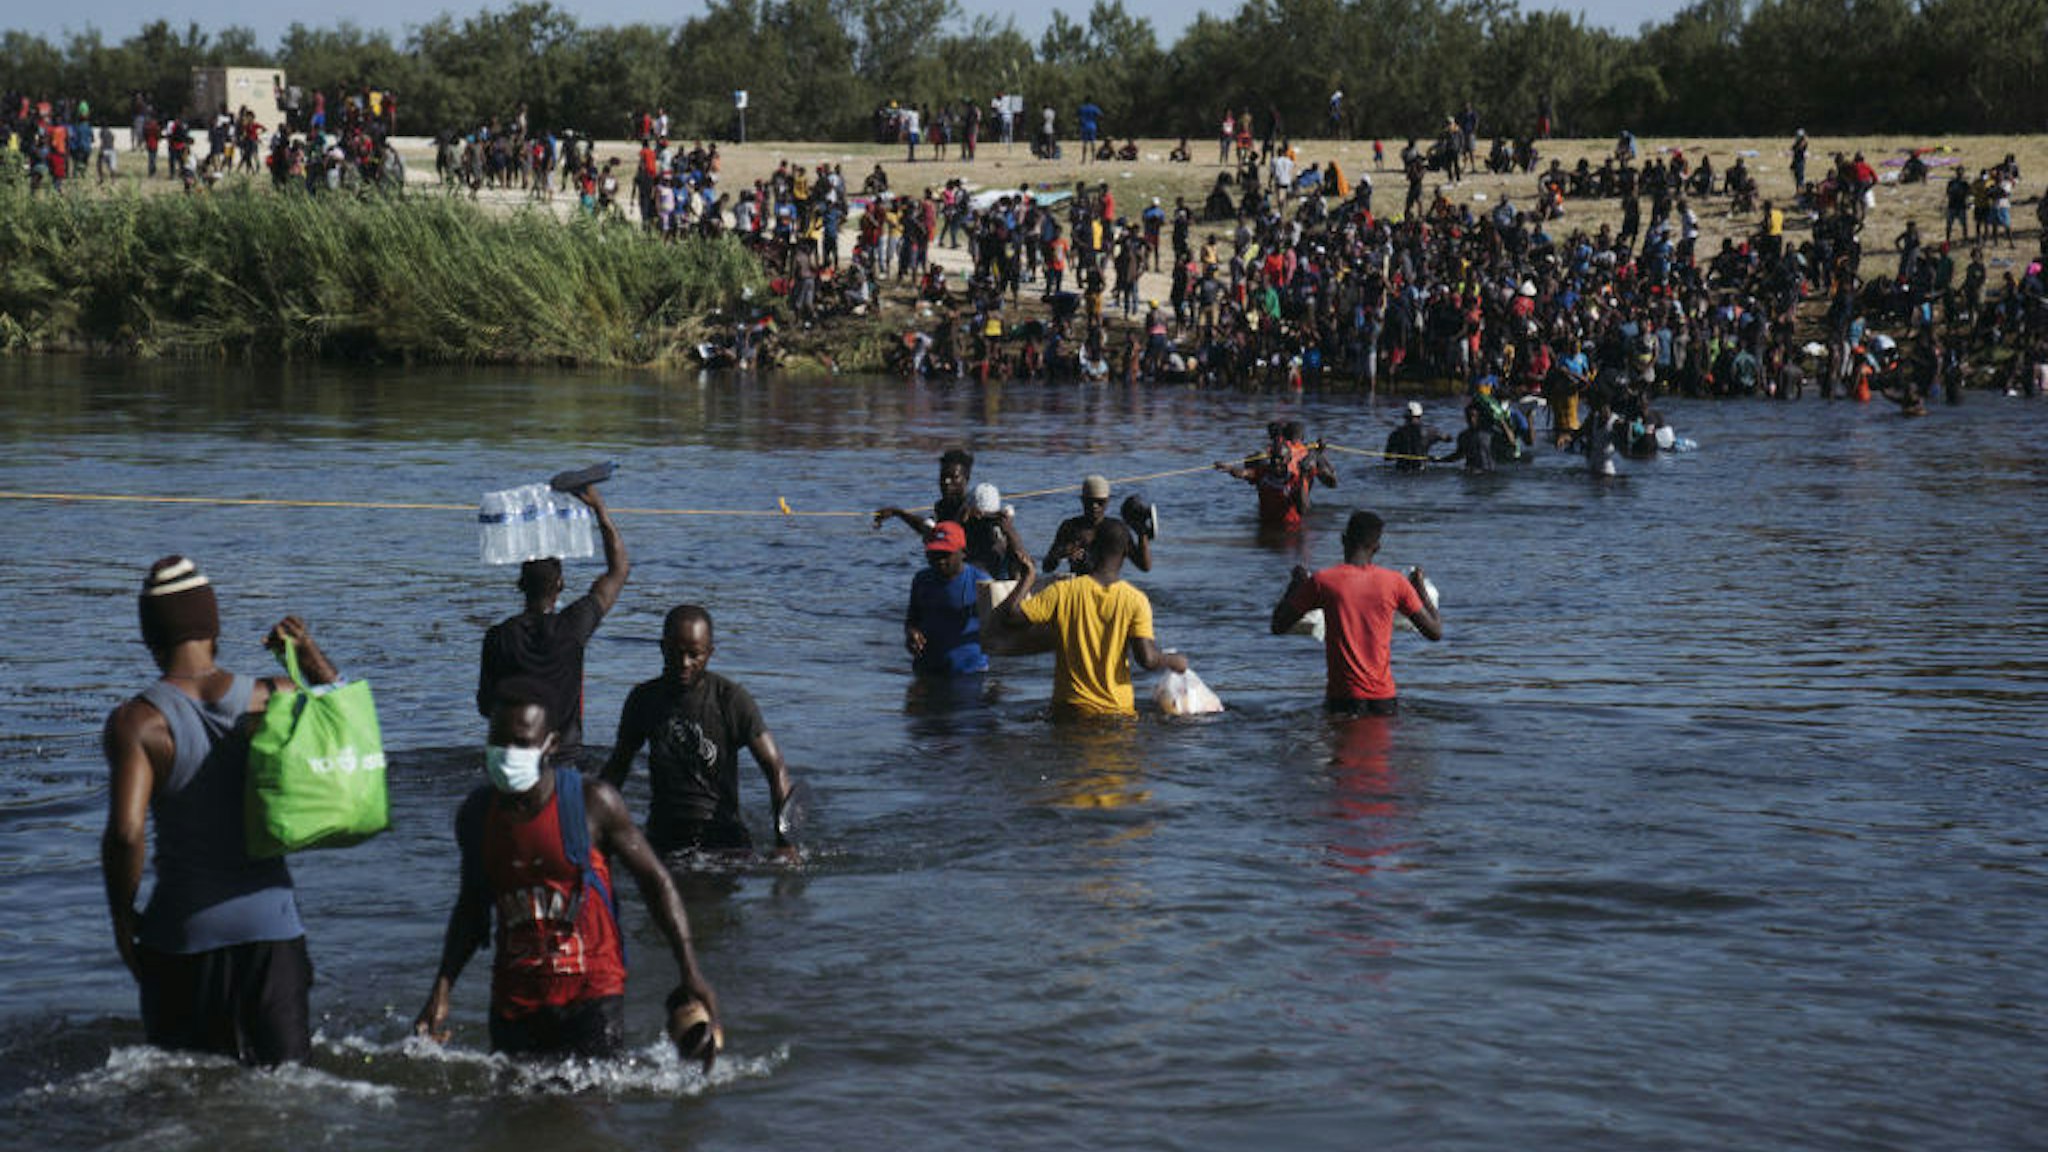 Migrants cross the Rio Grande River near the Del Rio-Acuna Port of Entry in Acuna, Coahuila state, Mexico, on Monday, Sept. 20, 2021. The U.S. flew Haitians camped in a Texas border town back to their homeland Sunday and tried blocking others from crossing the border from Mexico in a massive show of force that signaled the beginning of what could be one of America's swiftest, large-scale expulsions of migrants or refugees in decades, reports the Associated Press. Photographer: Eric Thayer/Bloomberg